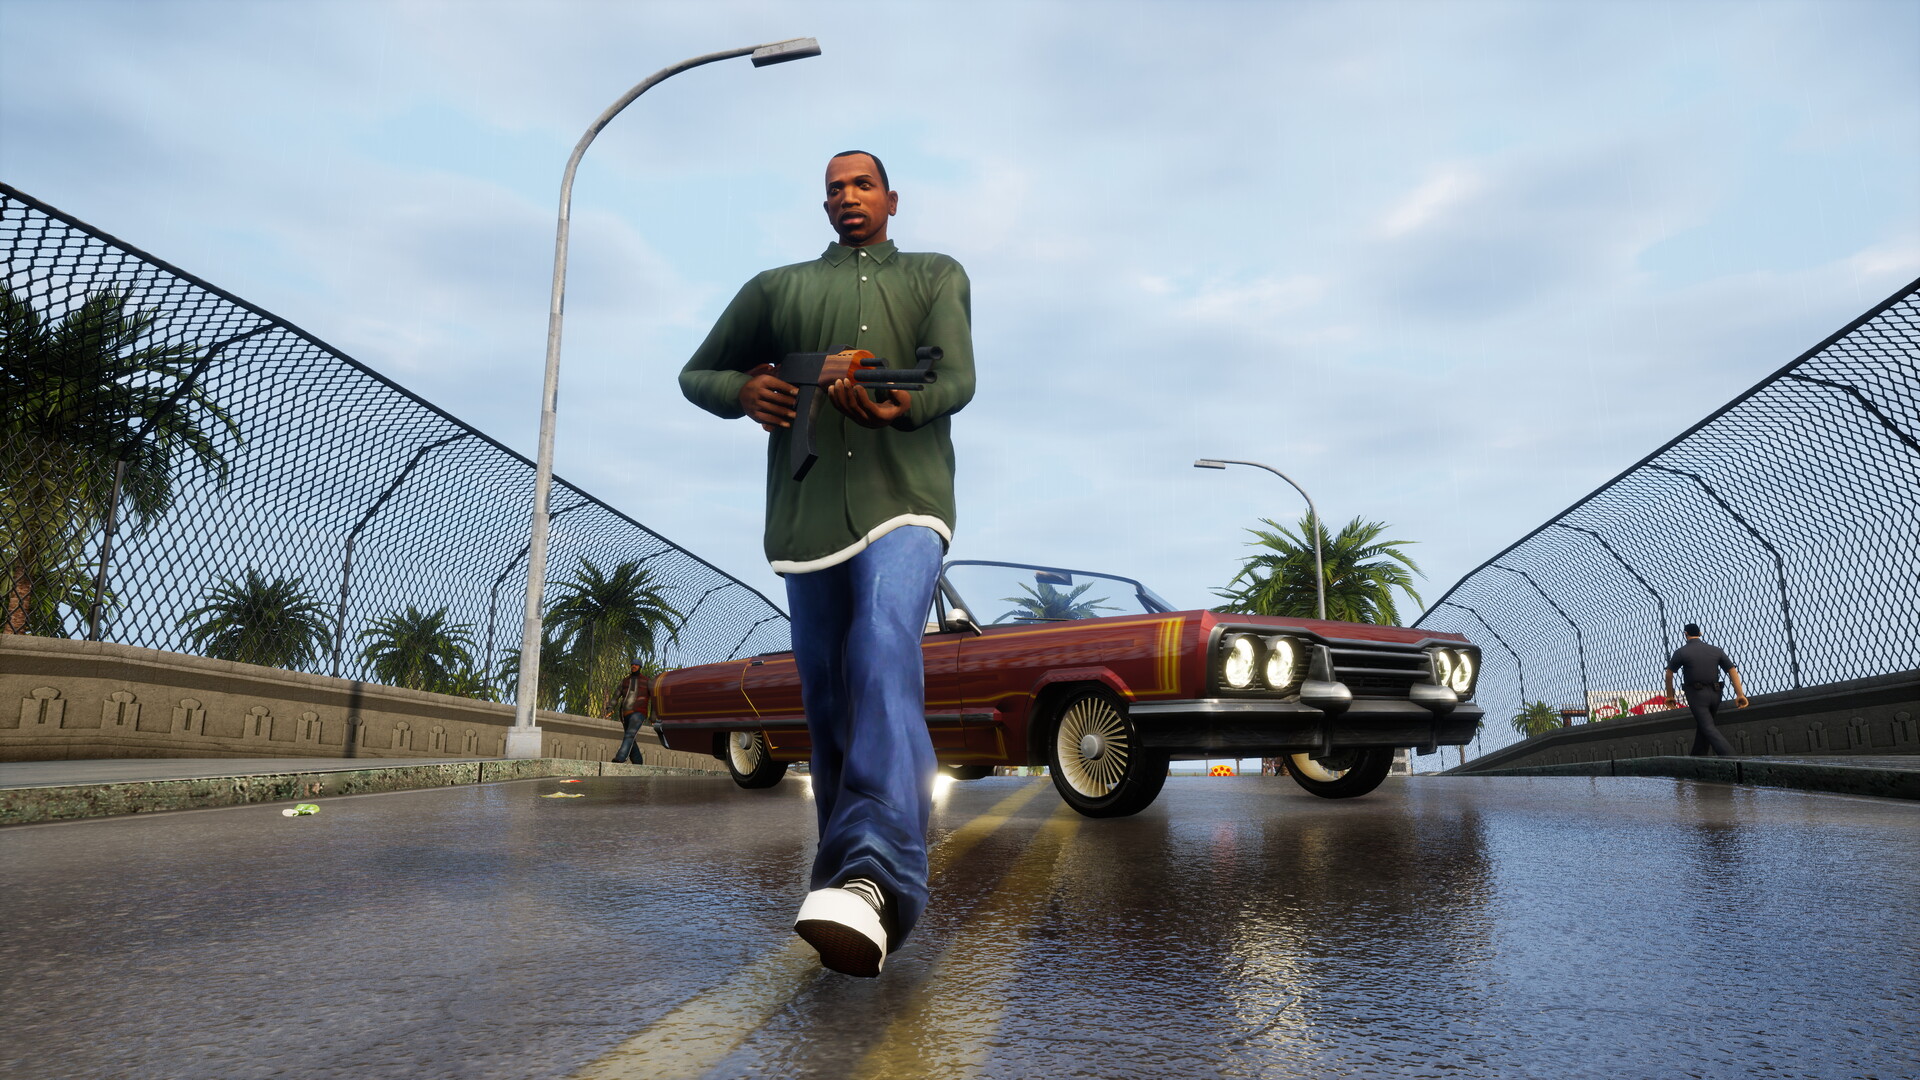 Grand Theft Auto: San Andreas – The Definitive Edition on Steam